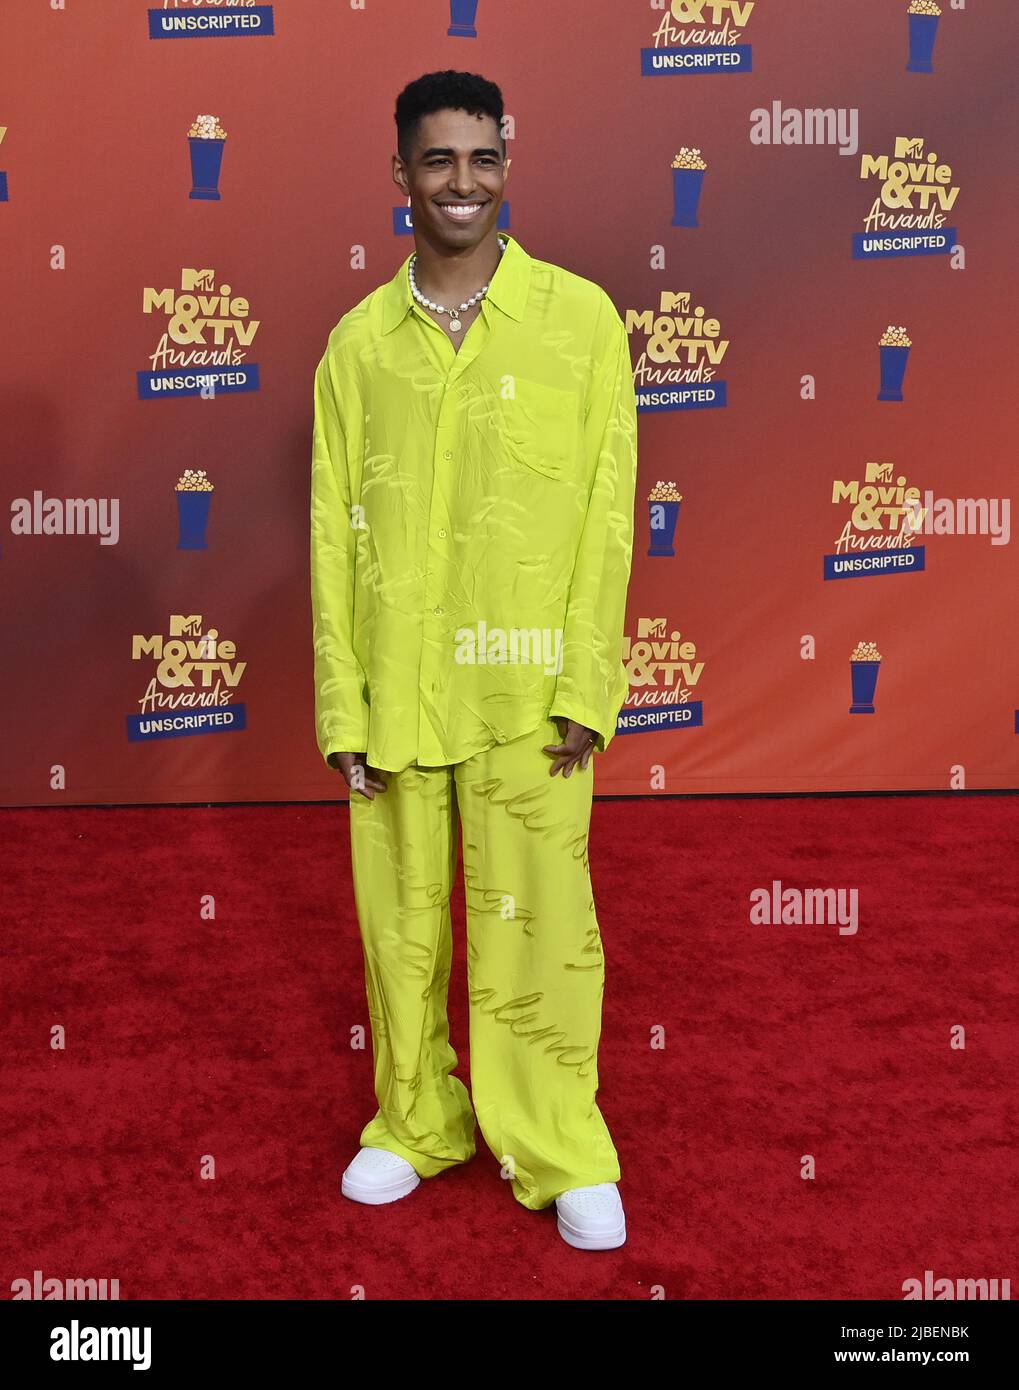 Santa Monica, United States. 05th June, 2022. In this embargoed image released on June 5, Boman Martinez-Reid attends the 2022 MTV Movie & TV Awards: UNSCRIPTED at Barker Hangar in Santa Monica, California on Thursday, June 2, 2022. Photo by Jim Ruymen/UPI Credit: UPI/Alamy Live News Stock Photo